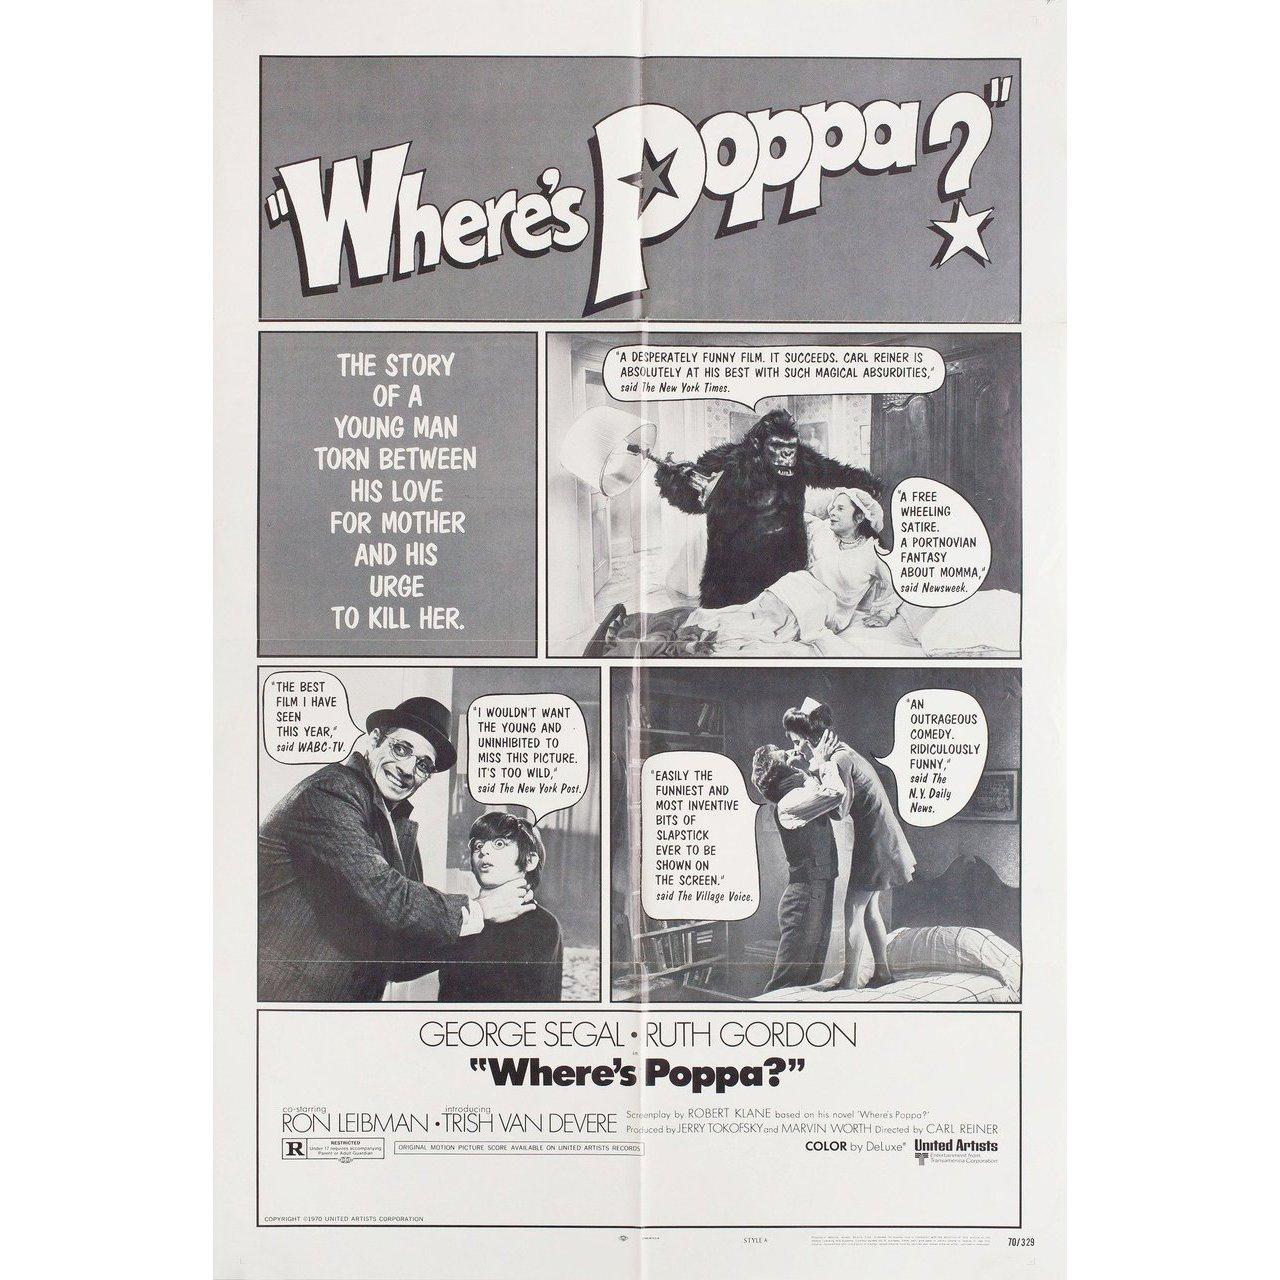 Original 1970 U.S. one sheet poster for the film “Where's Poppa?” directed by Carl Reiner with George Segal / Ruth Gordon / Ron Leibman / Trish Van Devere. Fair-good condition, folded with repaired fold separation. Many original posters were issued